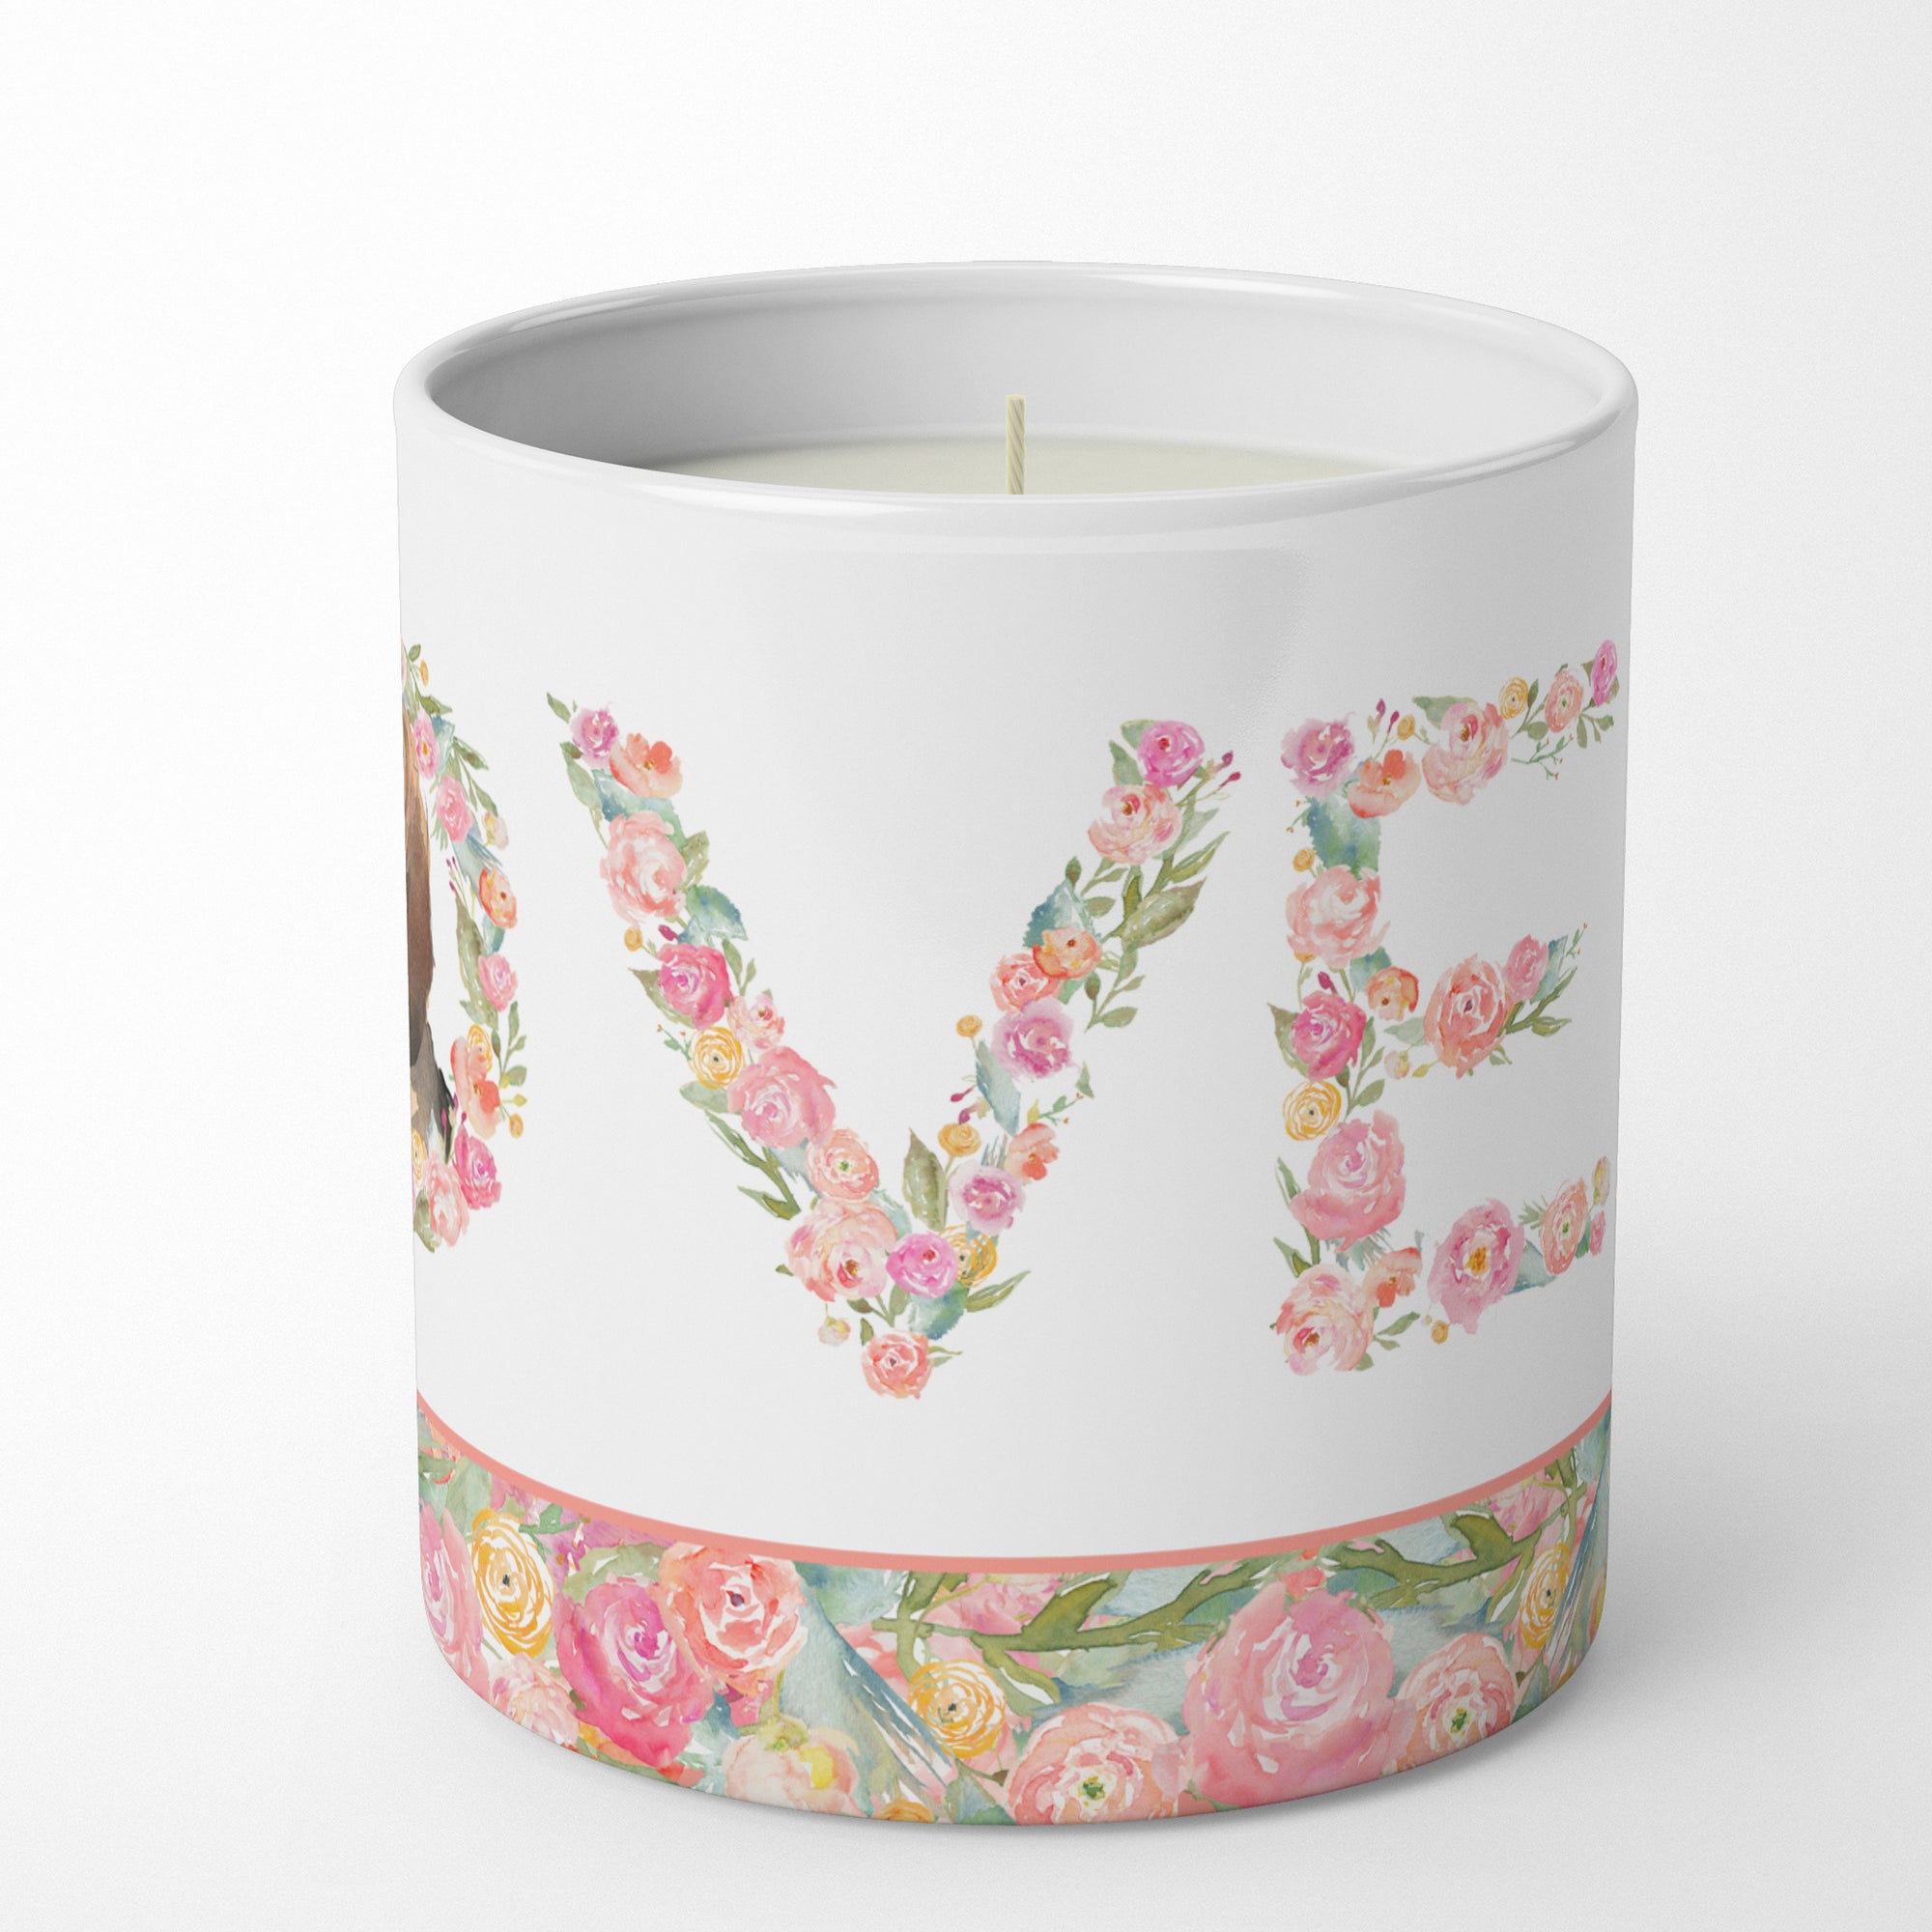 Bloodhound Love 10 oz Decorative Soy Candle - the-store.com